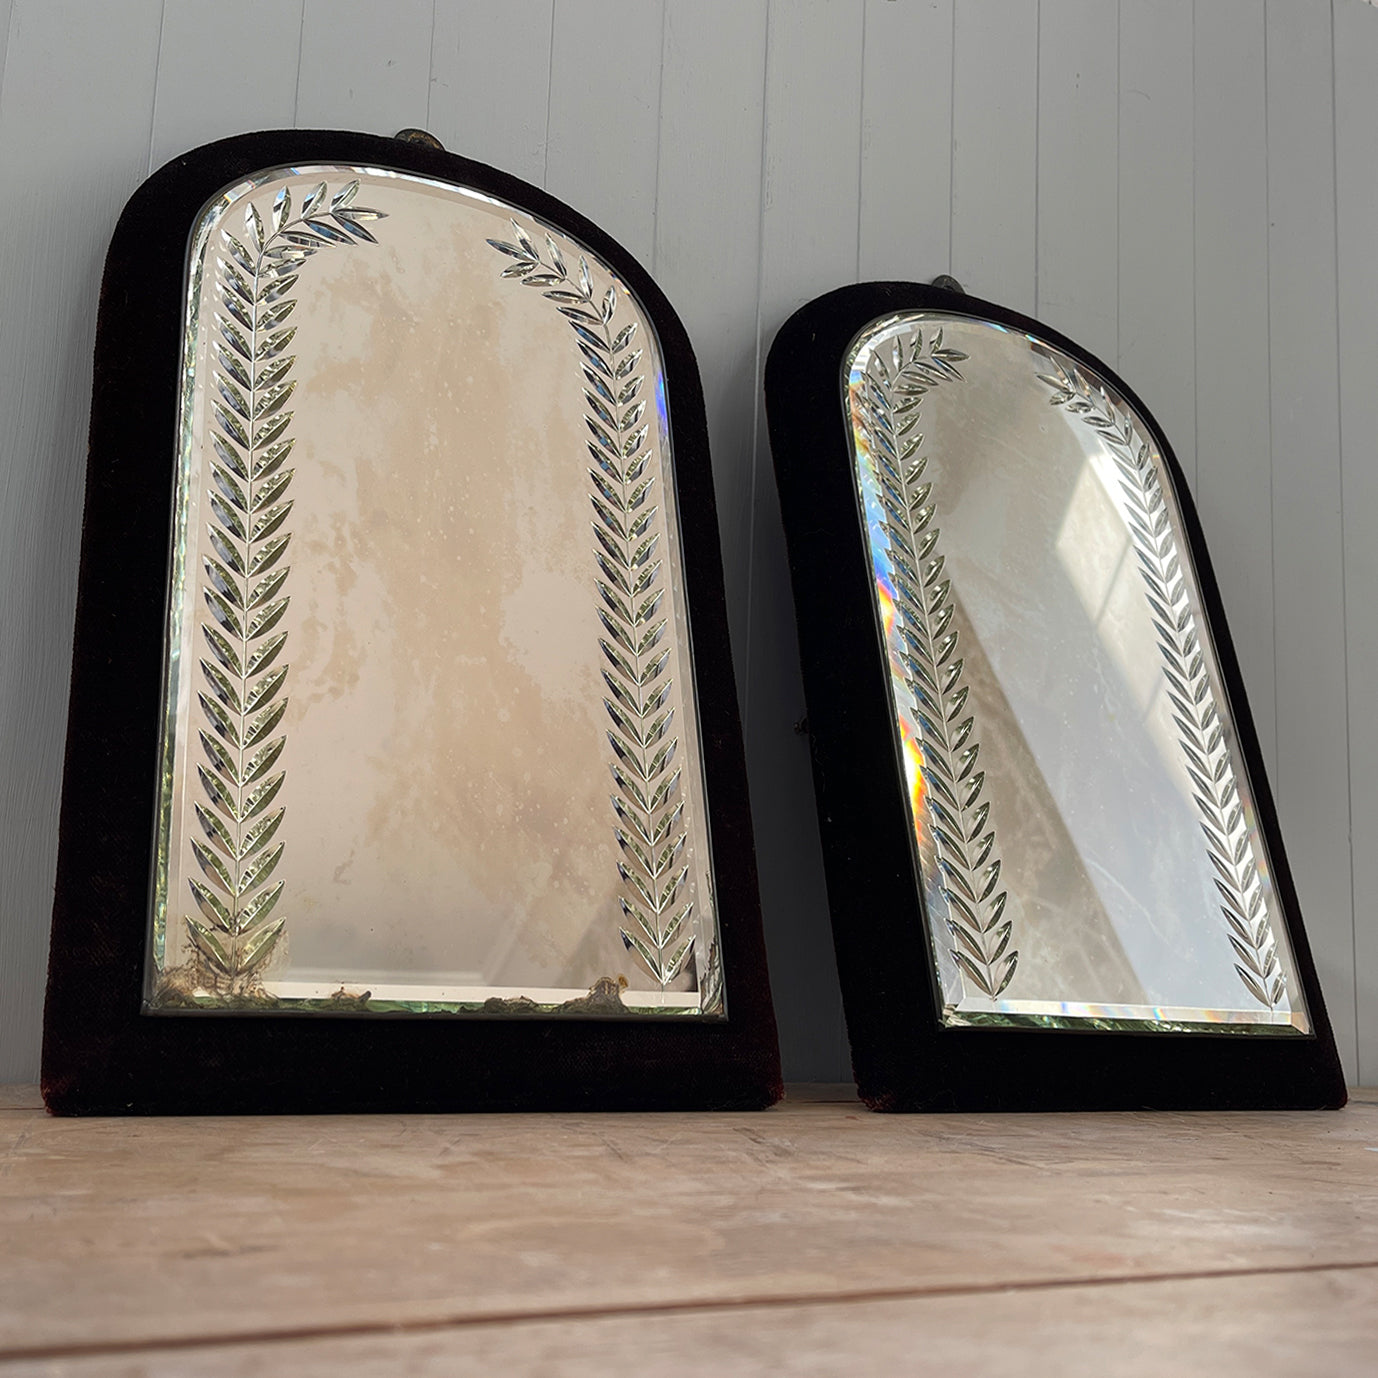 A fine pair of Victorian Velvet Framed Bright Cut Mirrors. Each mirror has deep red, almost black velvet frame with an arched mirror plate. The plates have bright cut leaf motifs that frame and catch the light beautifully - SHOP NOW - www.intovintage.co.uk